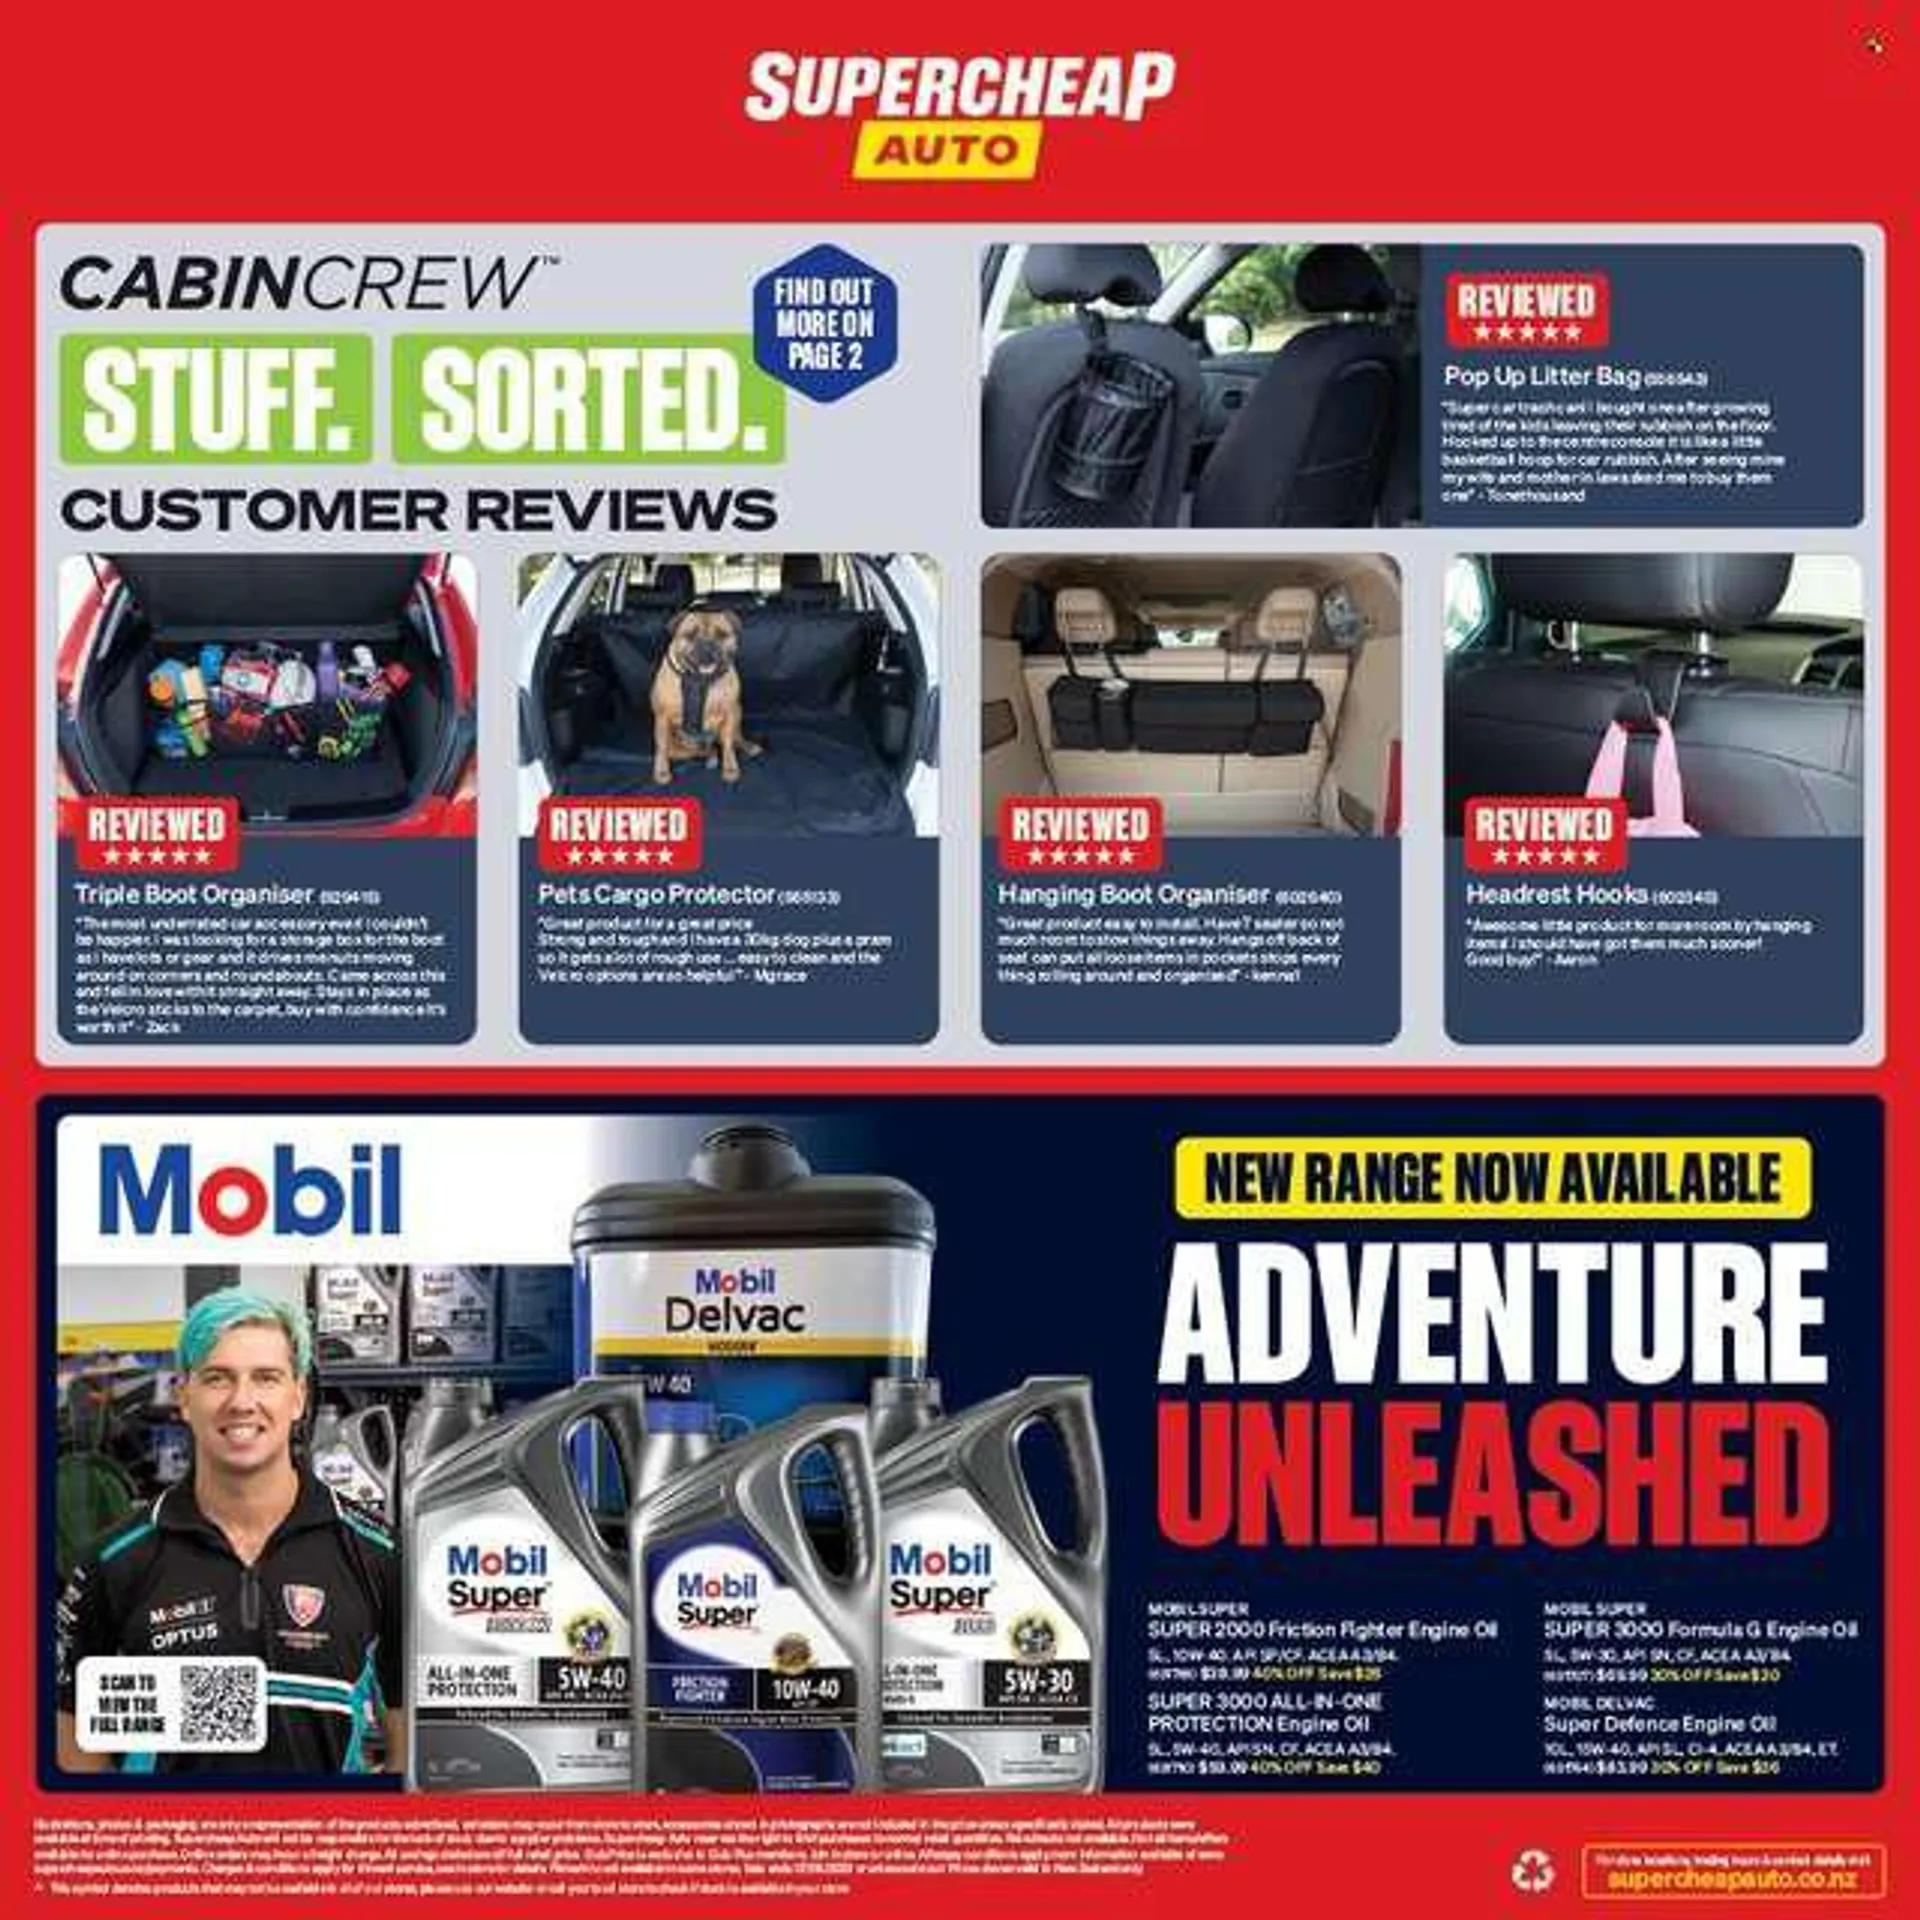 SuperCheap Auto mailer - 28.07.2022 - 07.08.2022 - Sales products - hook, Mobil, motor oil, bag. Page 16.